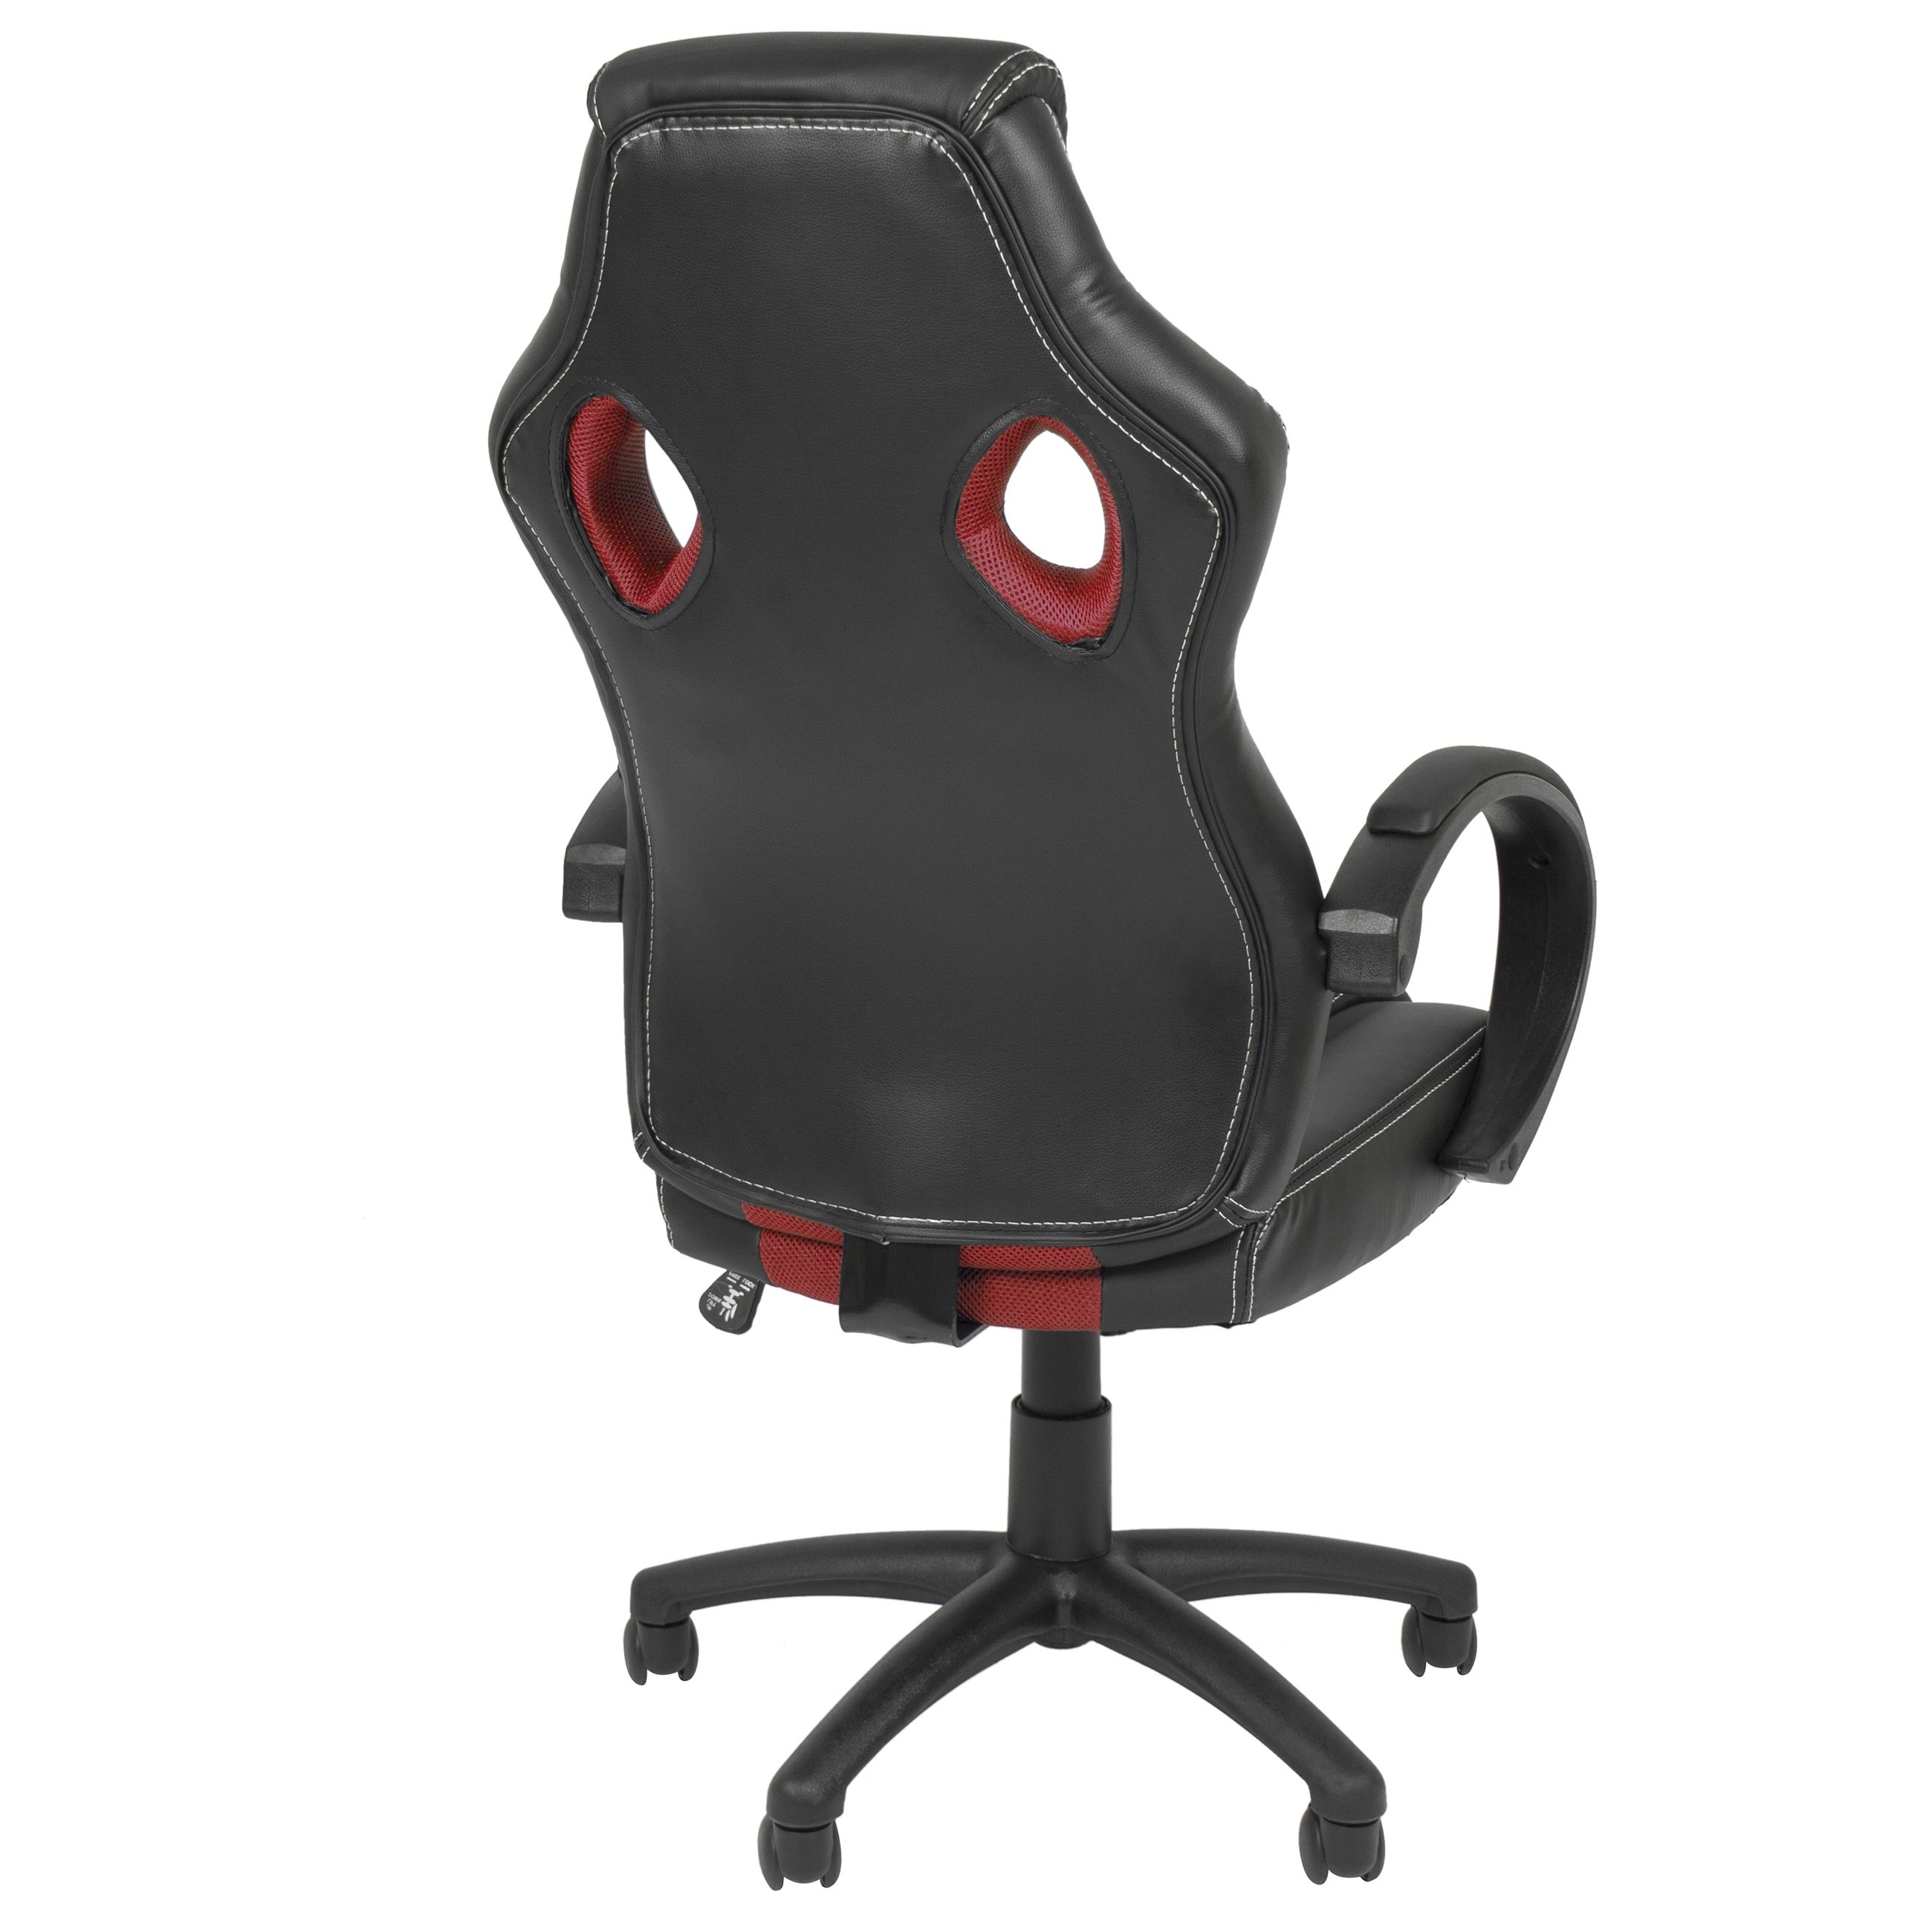 Well Known Executive Racing Gaming Office Chair Pu Leather Swivel Computer Inside Executive Office Racing Chairs (View 10 of 20)